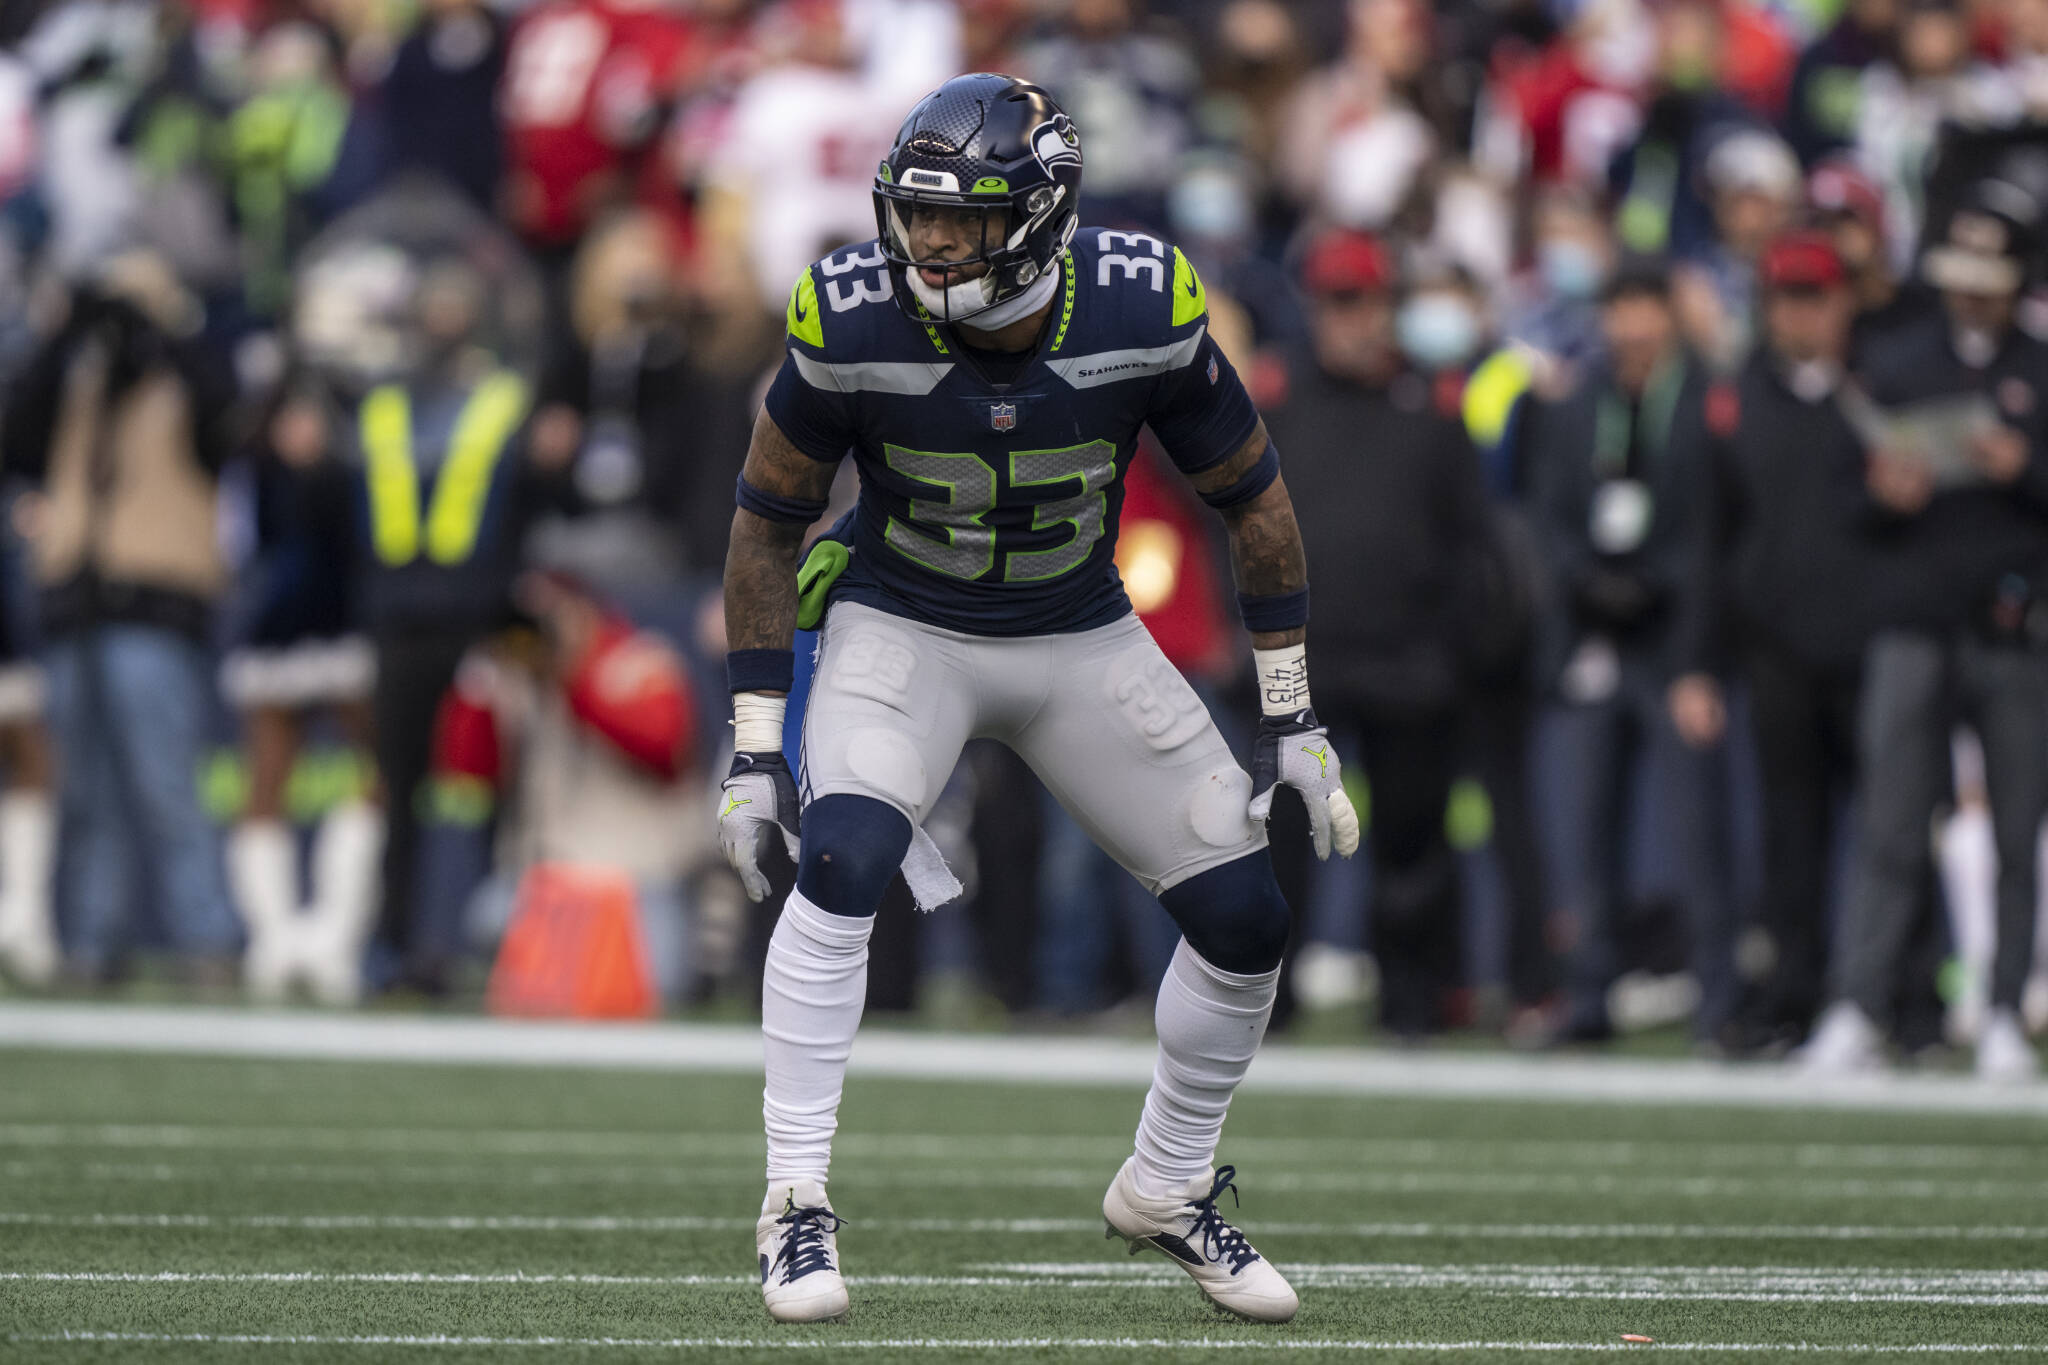 Stephen Brashear / Associated Press
Seahawks safety Jamal Adams gets set for a play during a game against the 49ers on Dec. 5, 2021, in Seattle.